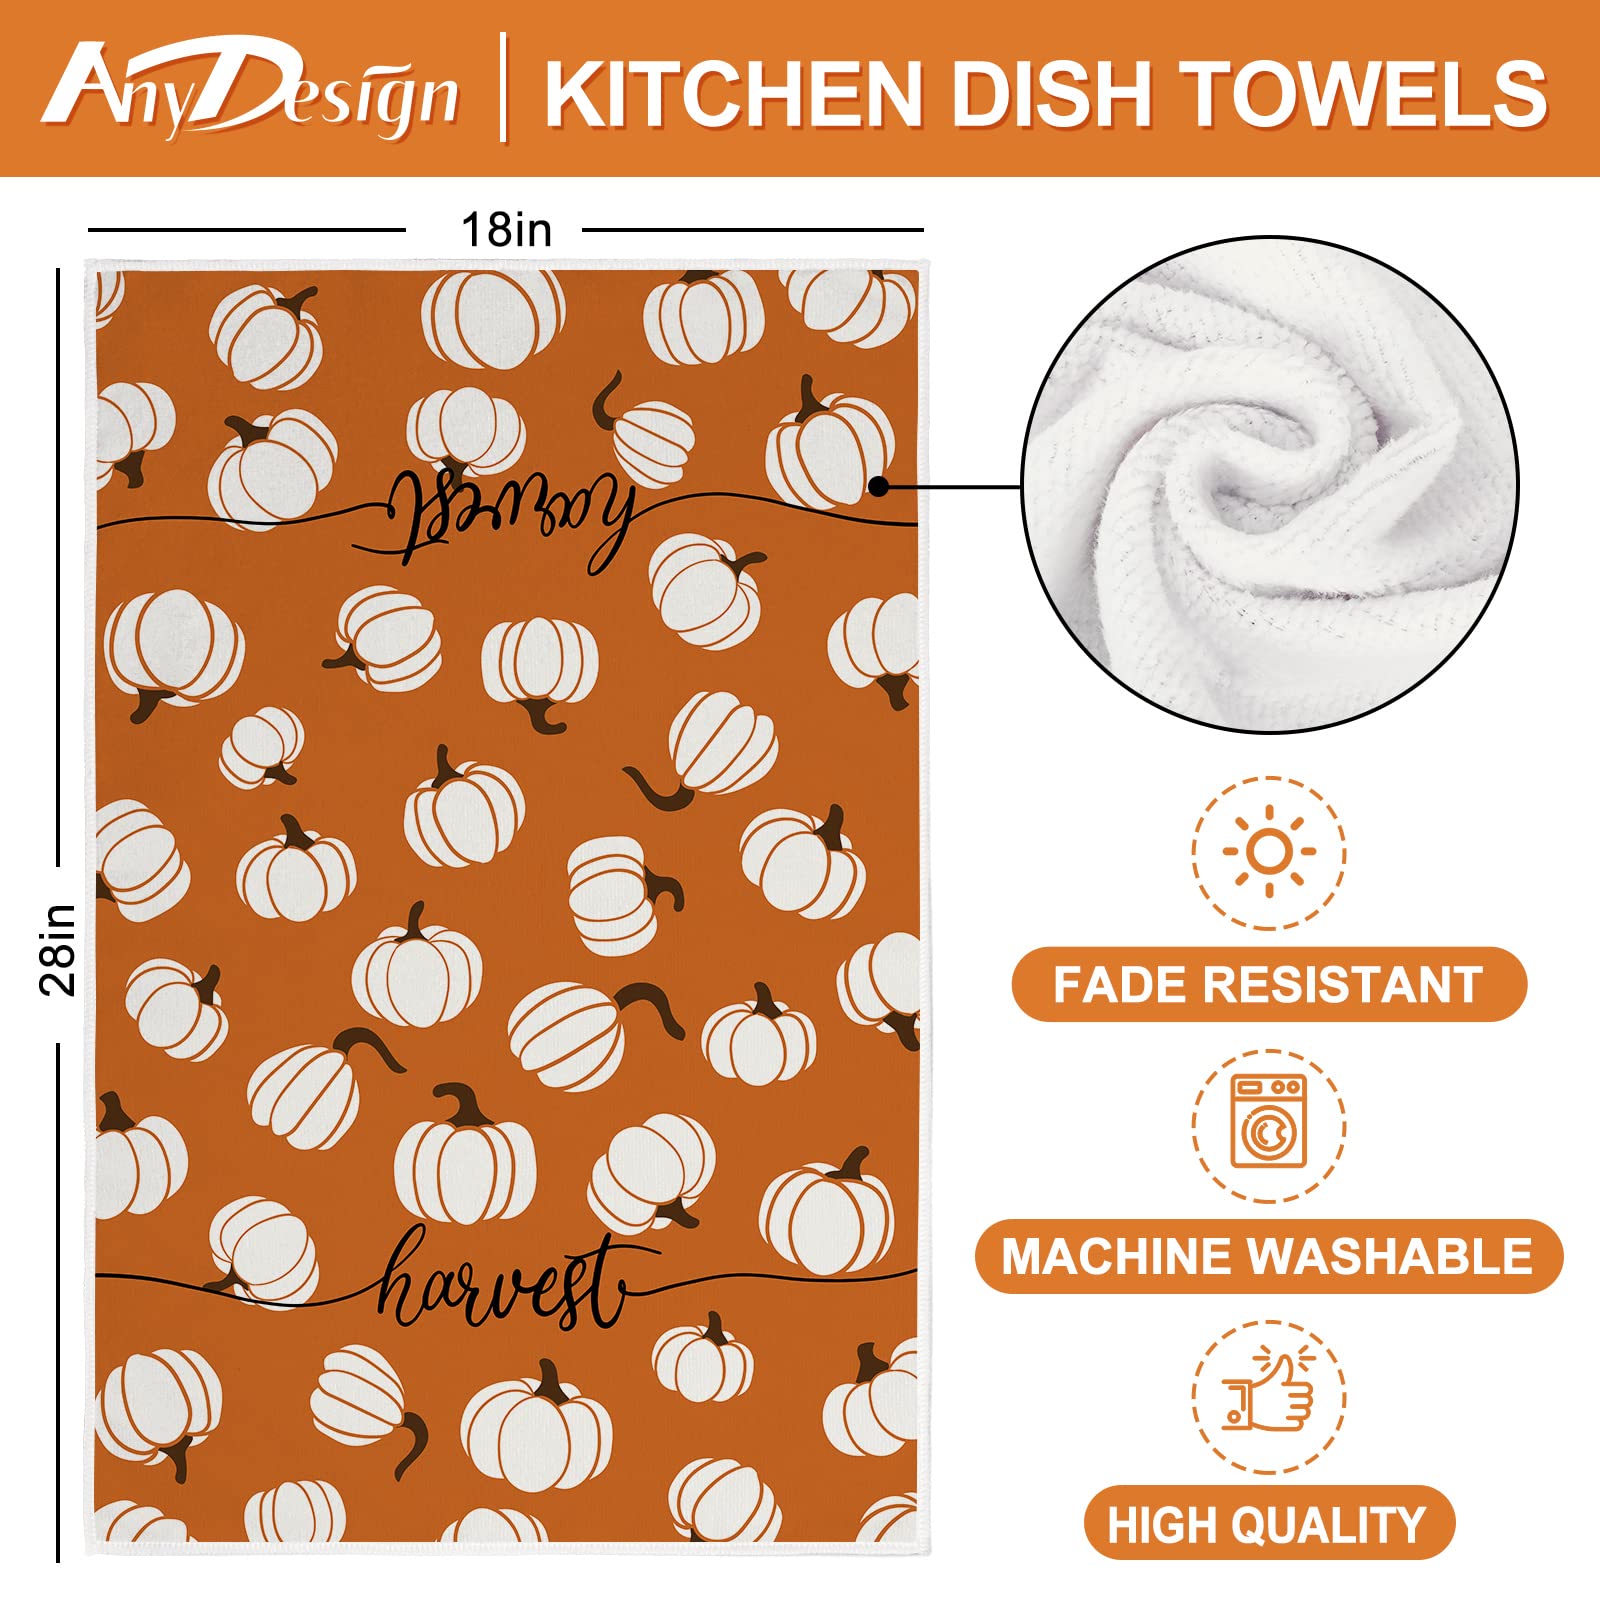 AnyDesign Fall Kitchen Dish Towel 18 x 28 Inch Pumpkin Maple Leaves Harvest Tea Towel Autumn Orange White Dishcloth Rustic Farmhouse Hand Drying Cloth Towel for Holiday Kitchen Cooking Baking, 4 Pack